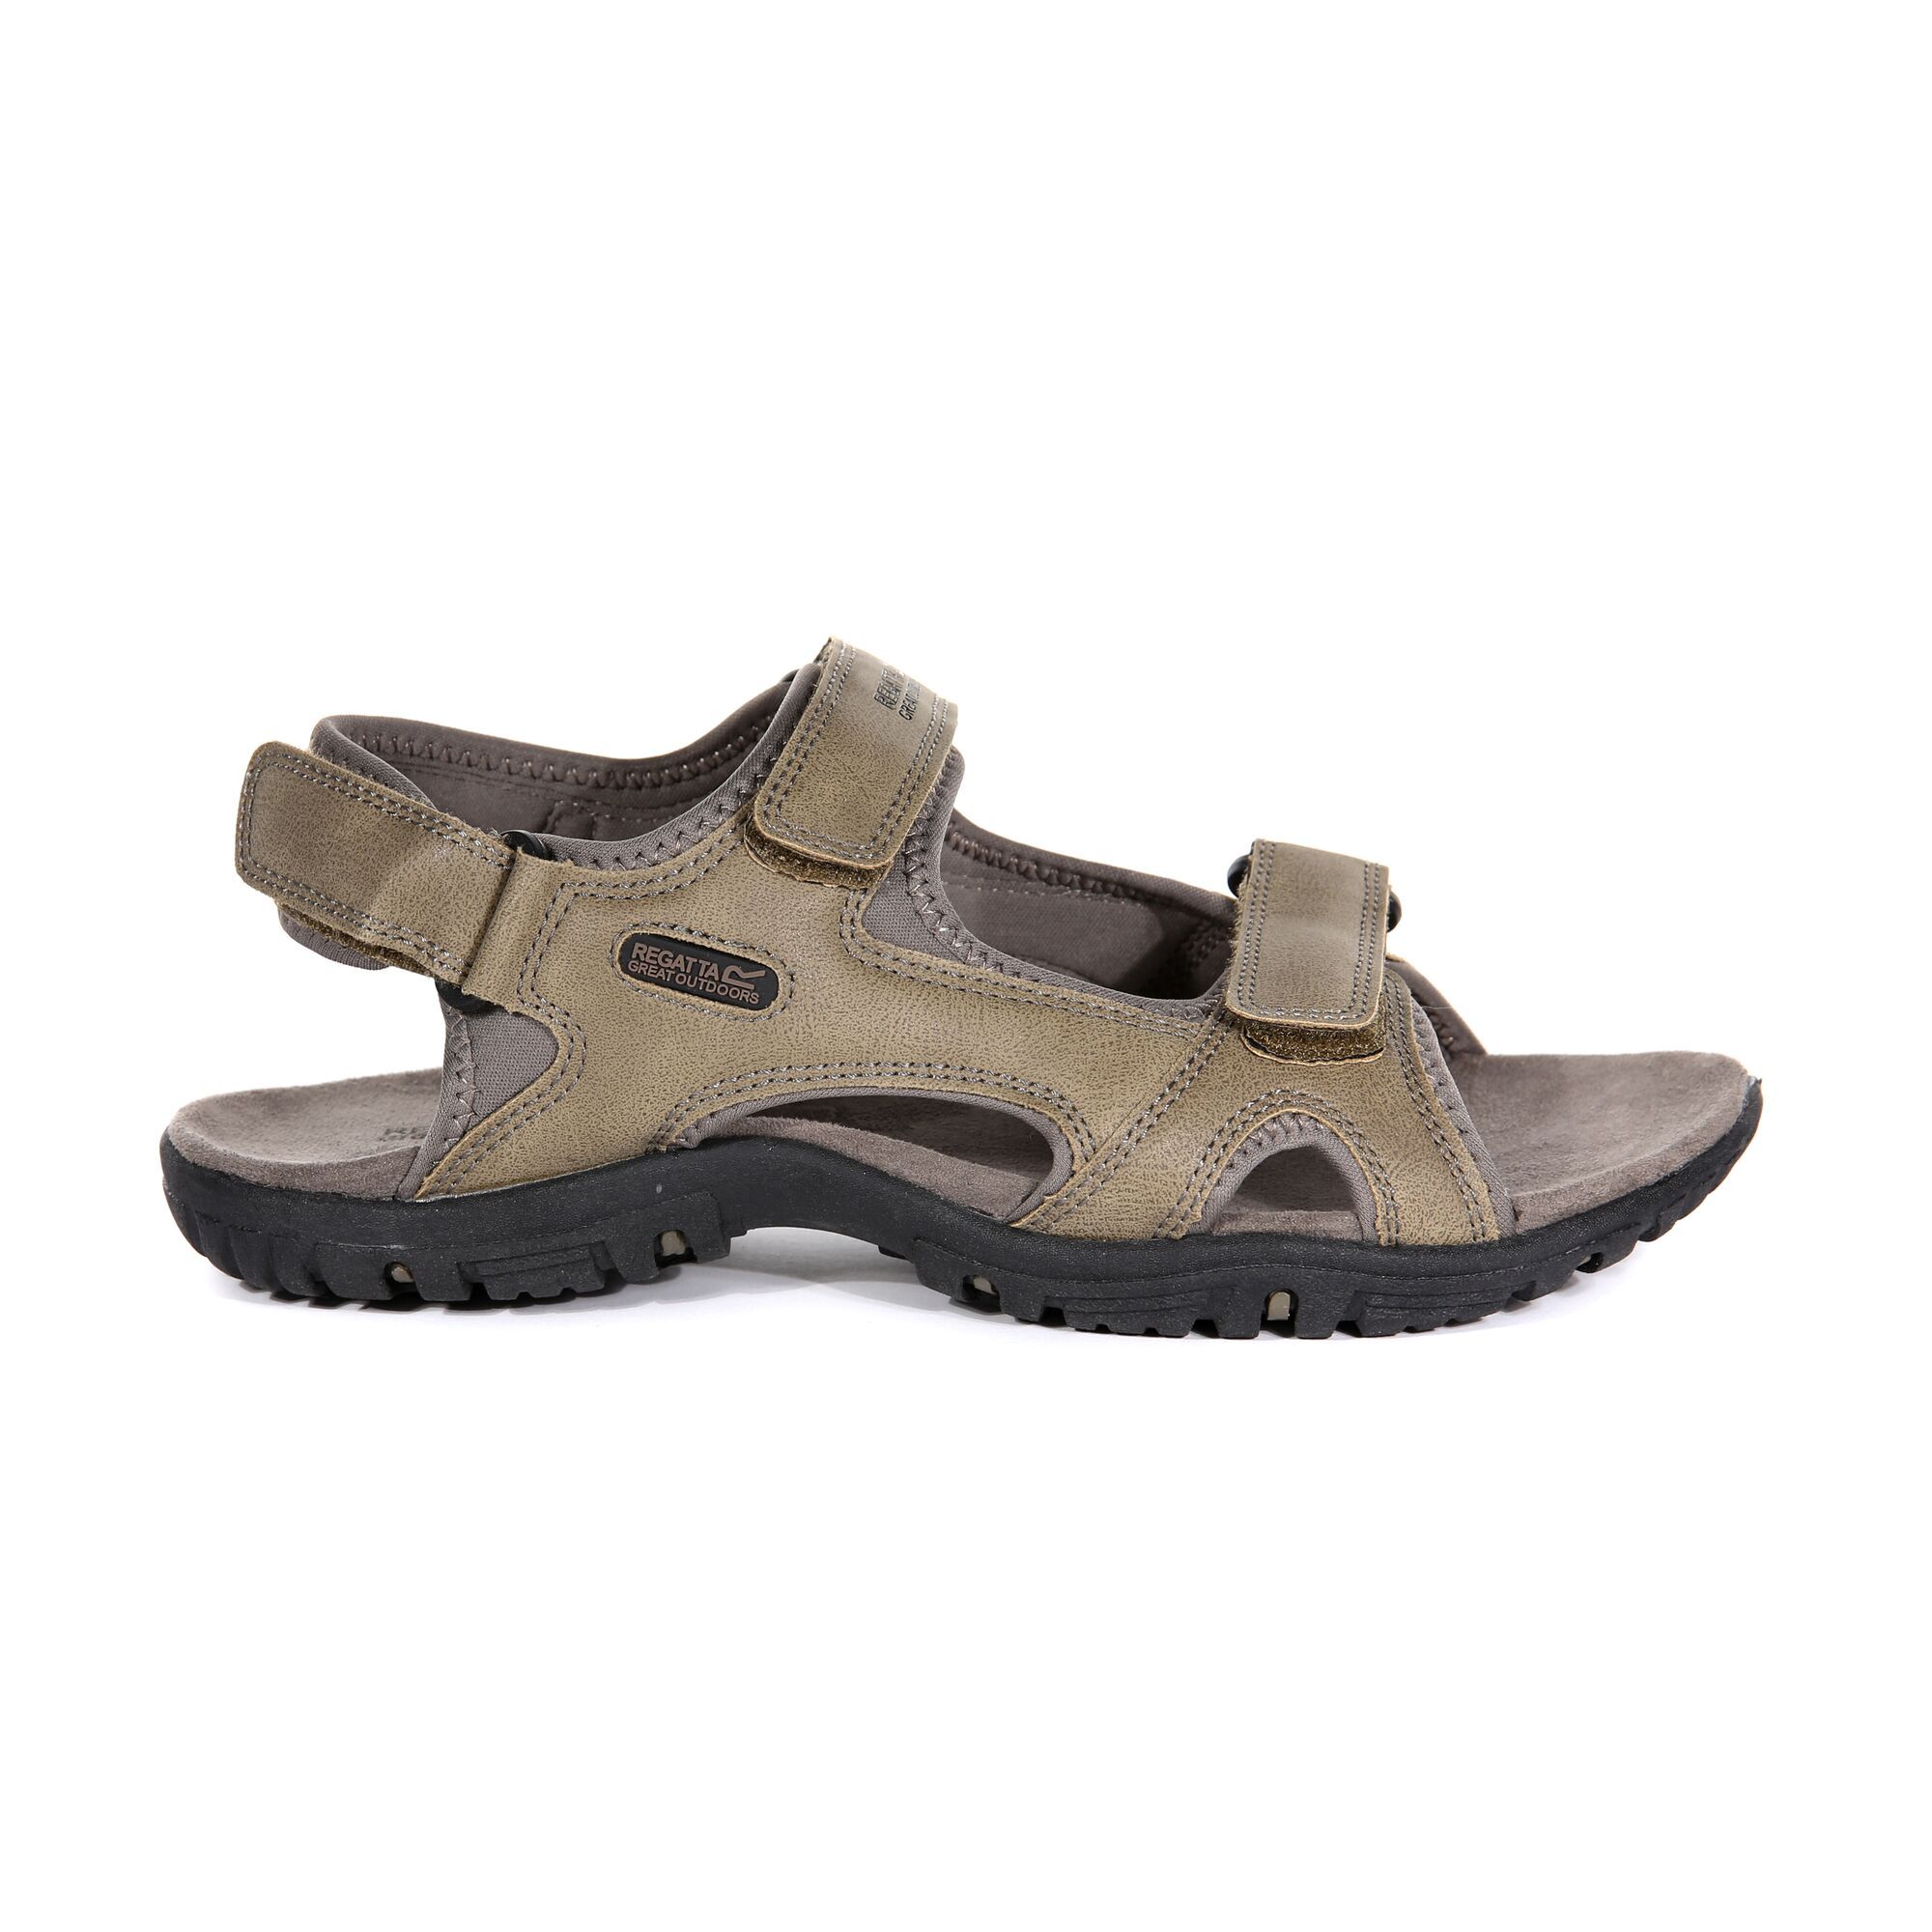 The Haris is our mens popular active sandal designed to keep your feet cool while offering plenty of support. The smooth PU upper is fully lined with soft and stretchy spandex to help prevent any nasty rubbing, and the backstrap is cushioned for extra comfort. All three straps can be adjusted for a perfect fit and the lightweight sole features a super-grippy, slip-resistant tread design. Complete with shock-absorbing cushioning in the midsole, the Haris sandal is perfect for holidays or day-to-day wear. Other Fibres/Materials (43%) Polyester (57%).